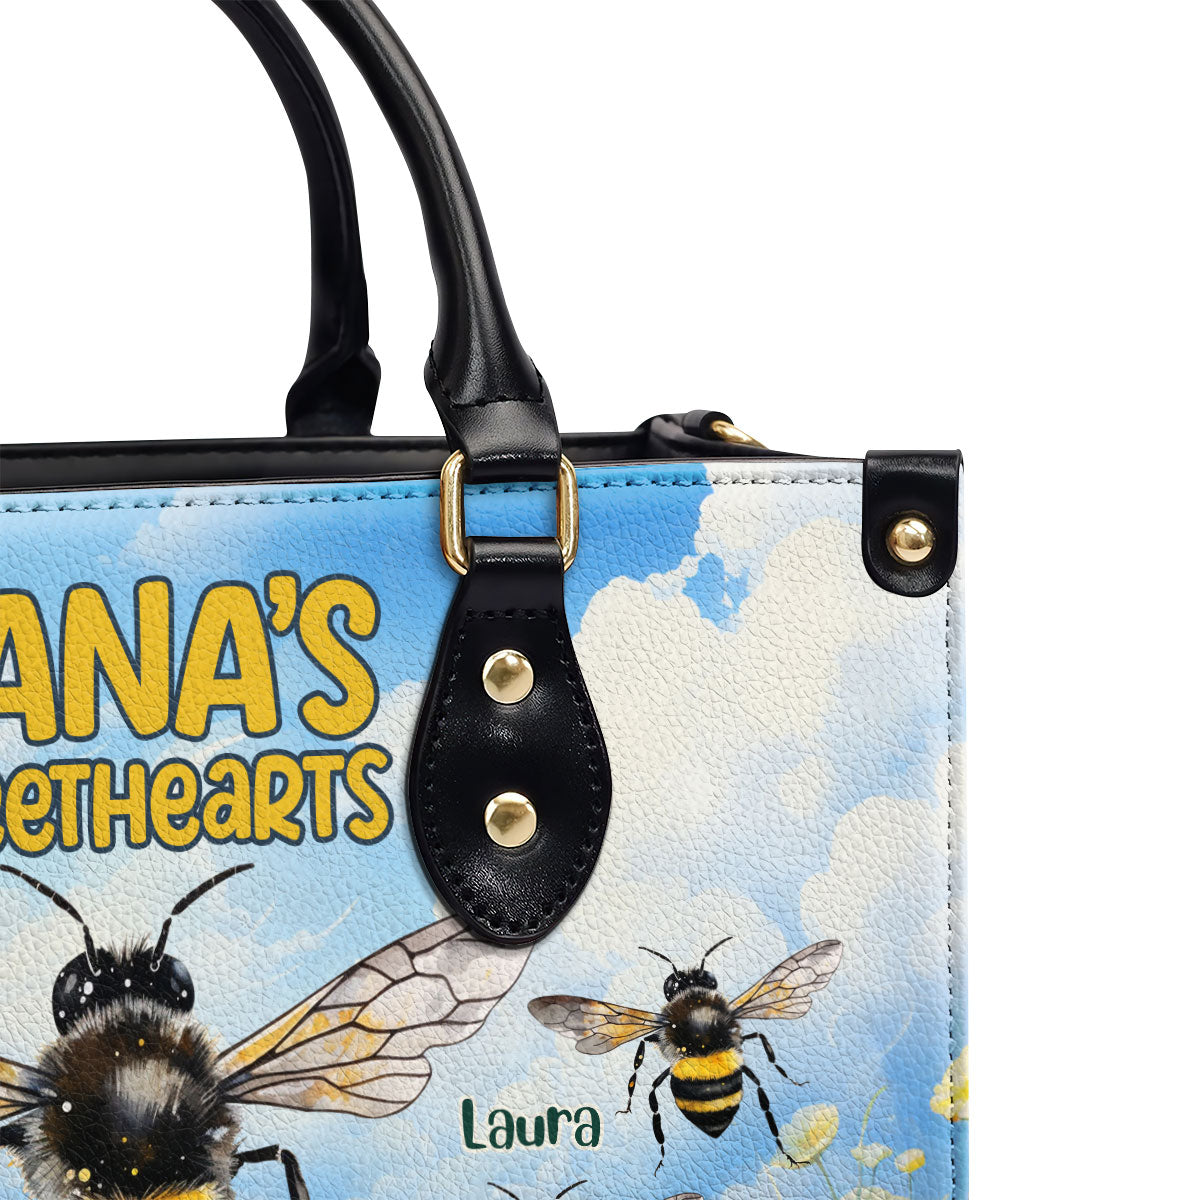 Nana's Sweethearts | Personalized Leather Handbag With Zipper LHBH838